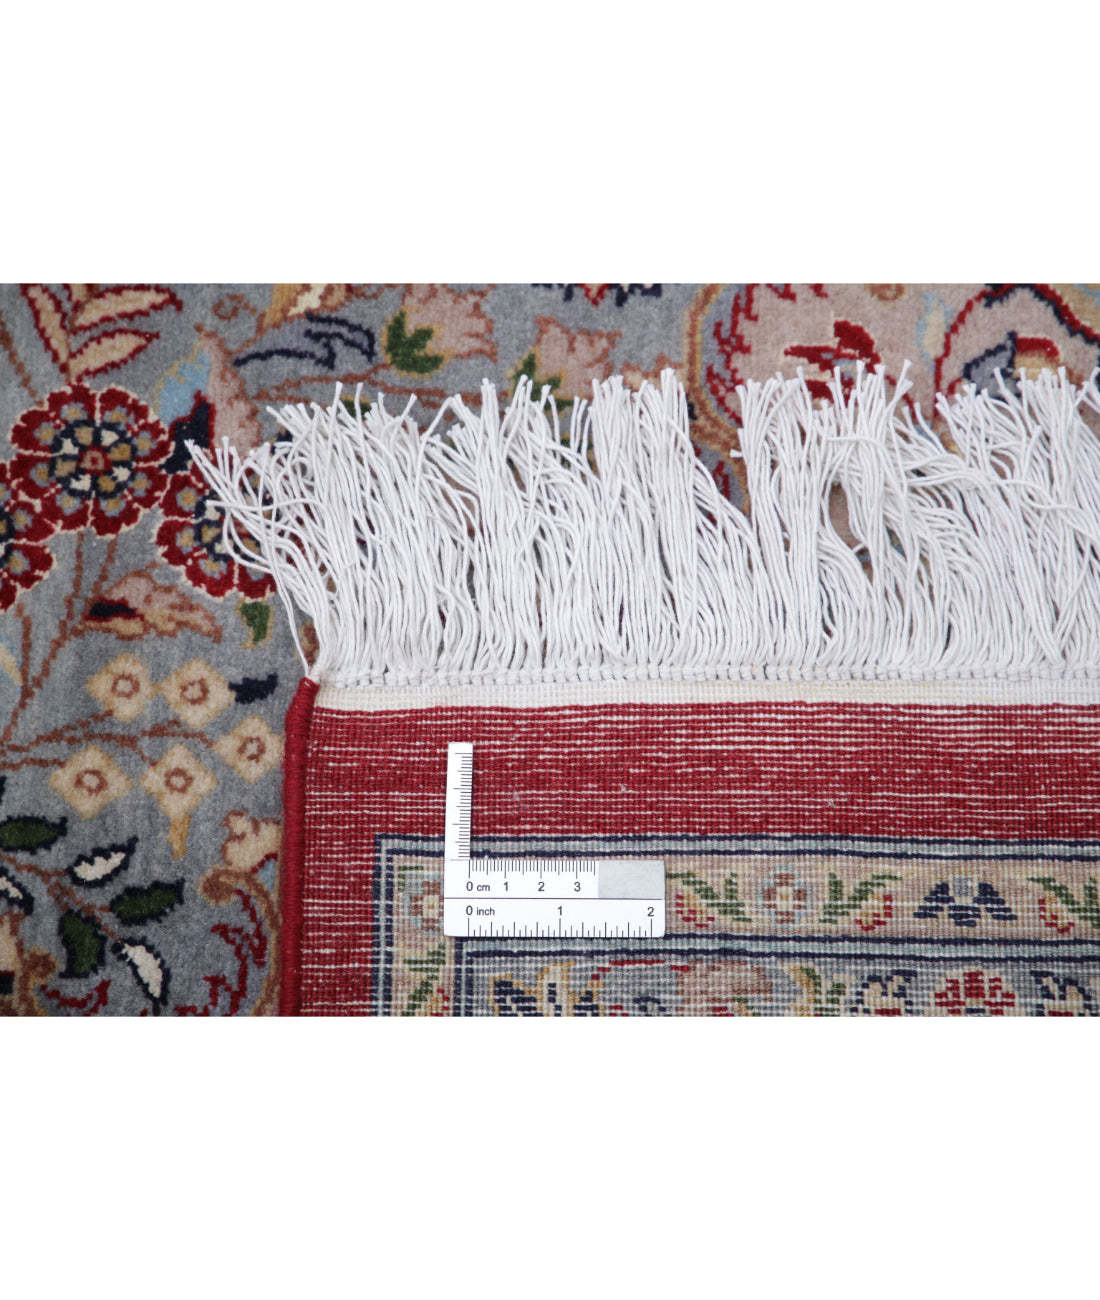 Heritage 9'1'' X 12'1'' Hand-Knotted Wool-Silk Rug 9'1'' x 12'1'' (273 X 363) / Red / Blue